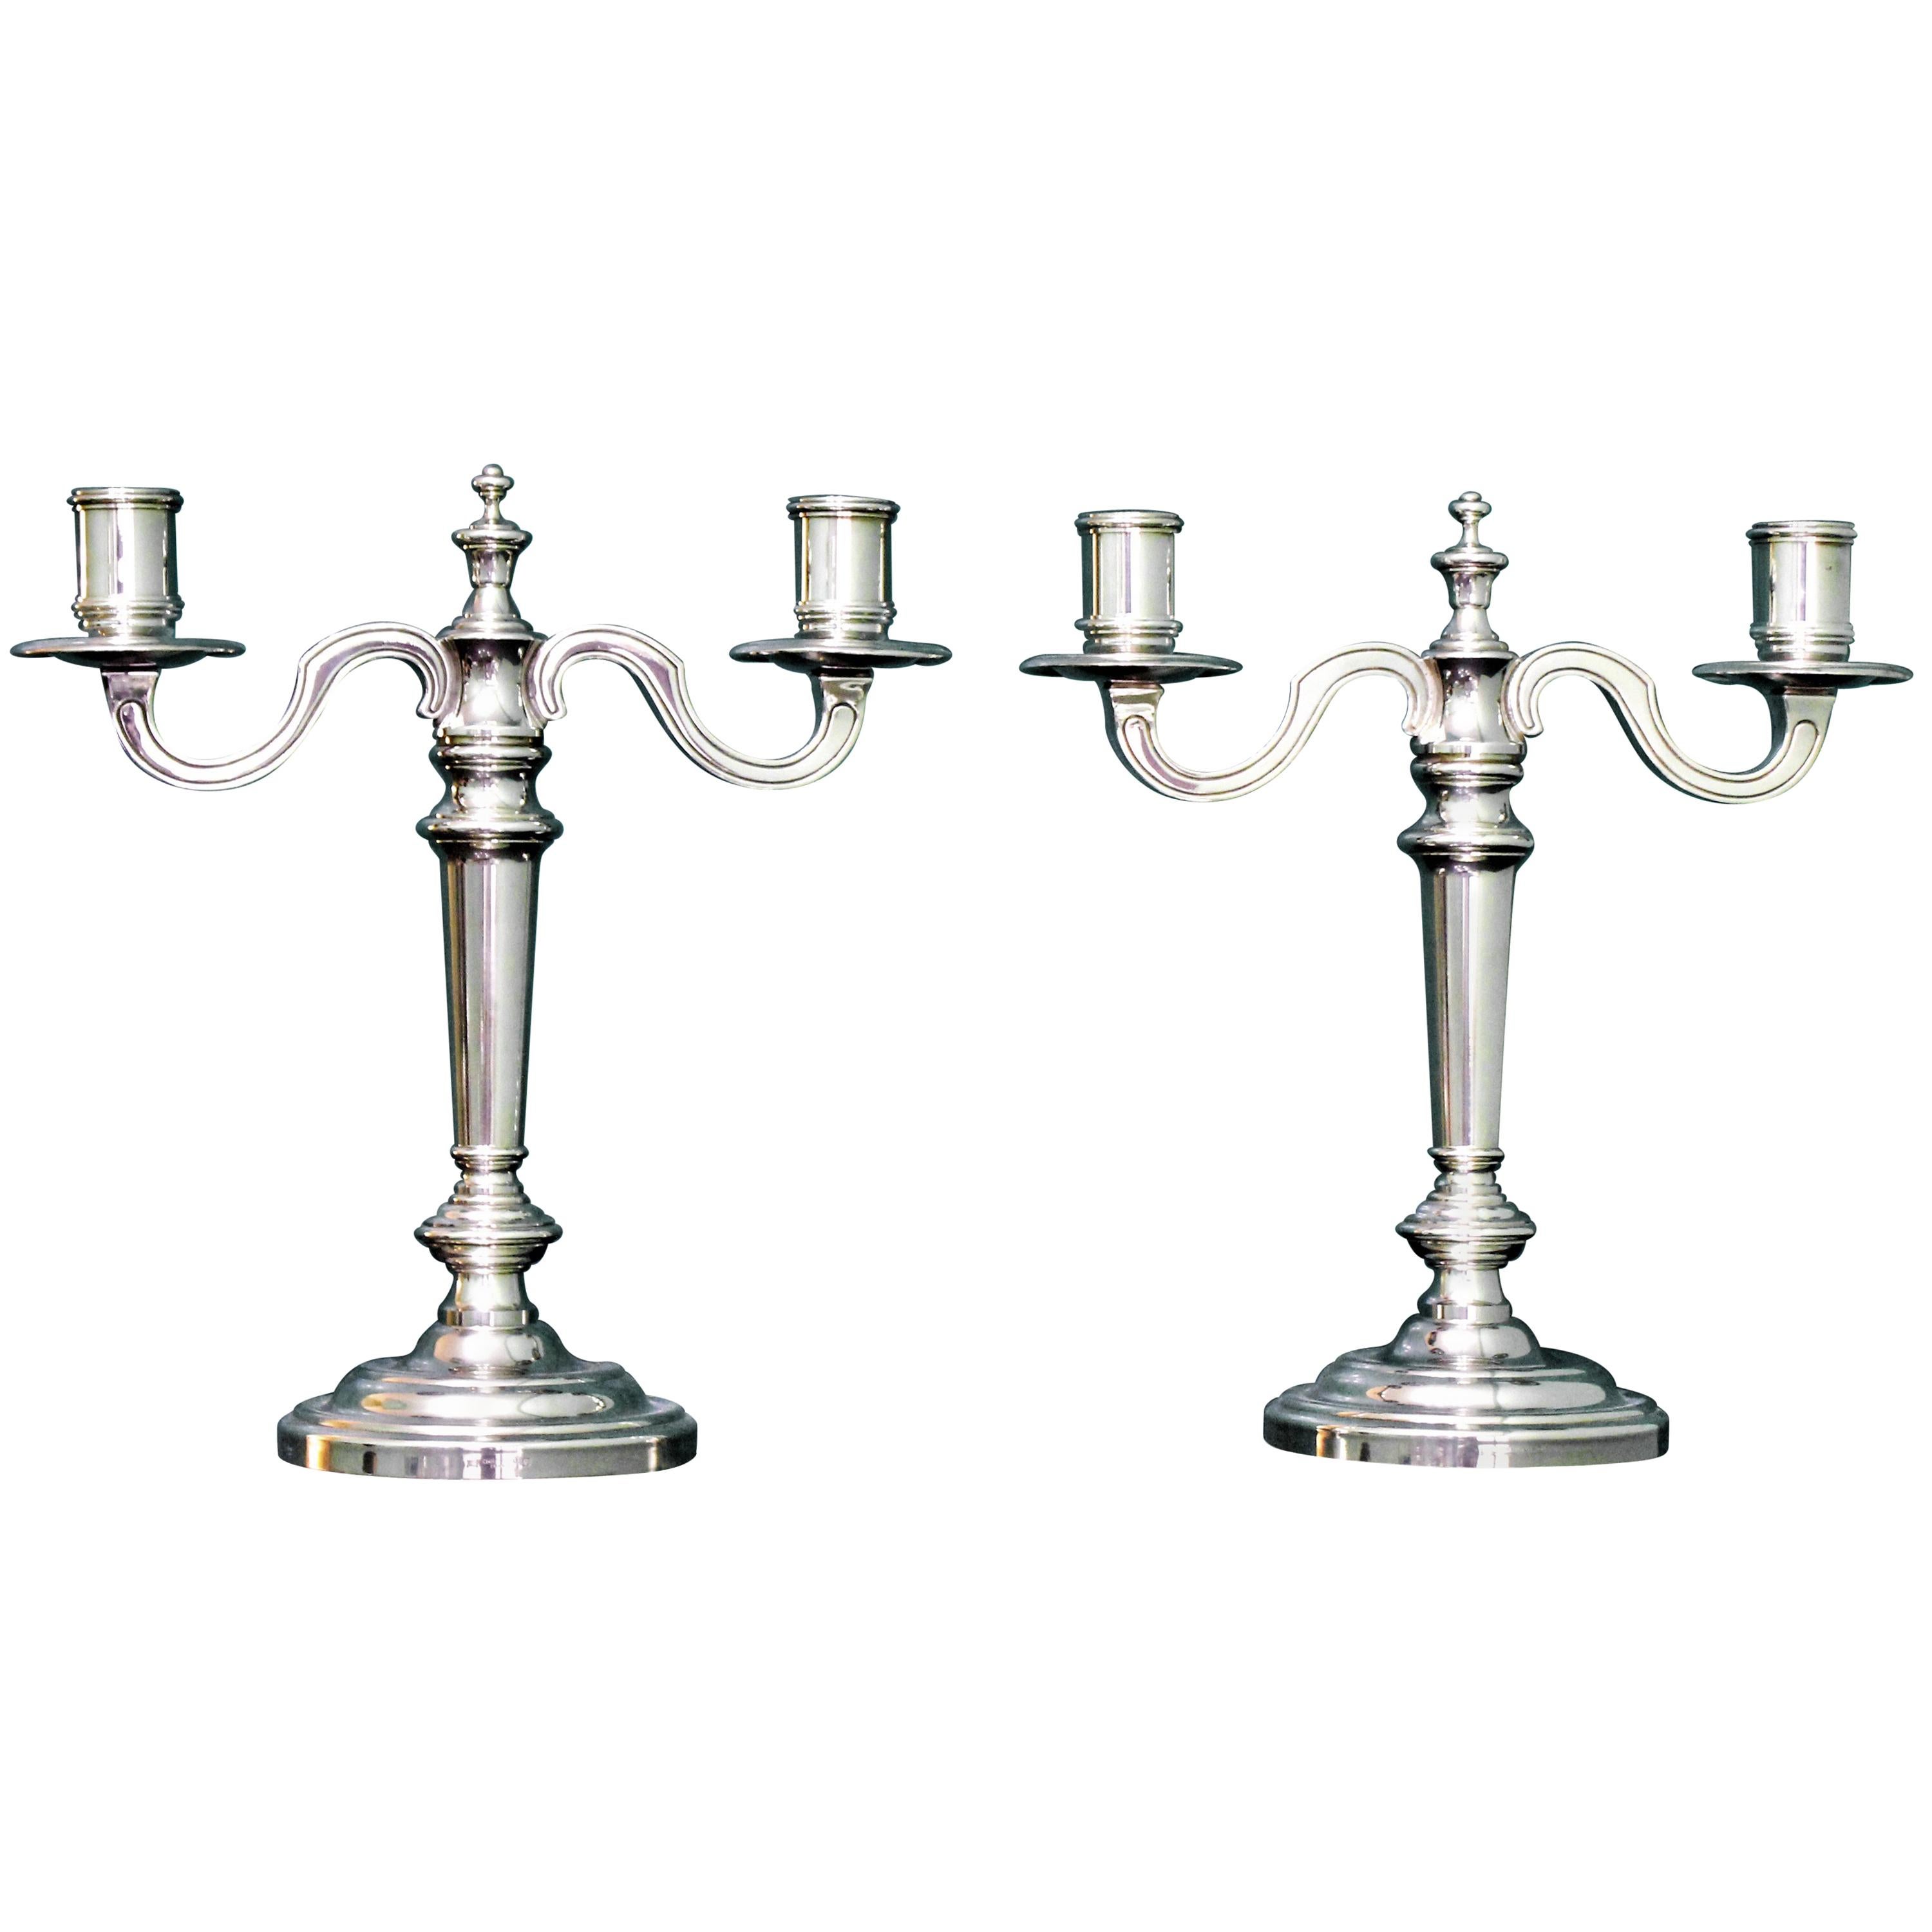 Christofle 20th Century French Silver Plated Pair of Candlesticks, 1970s For Sale